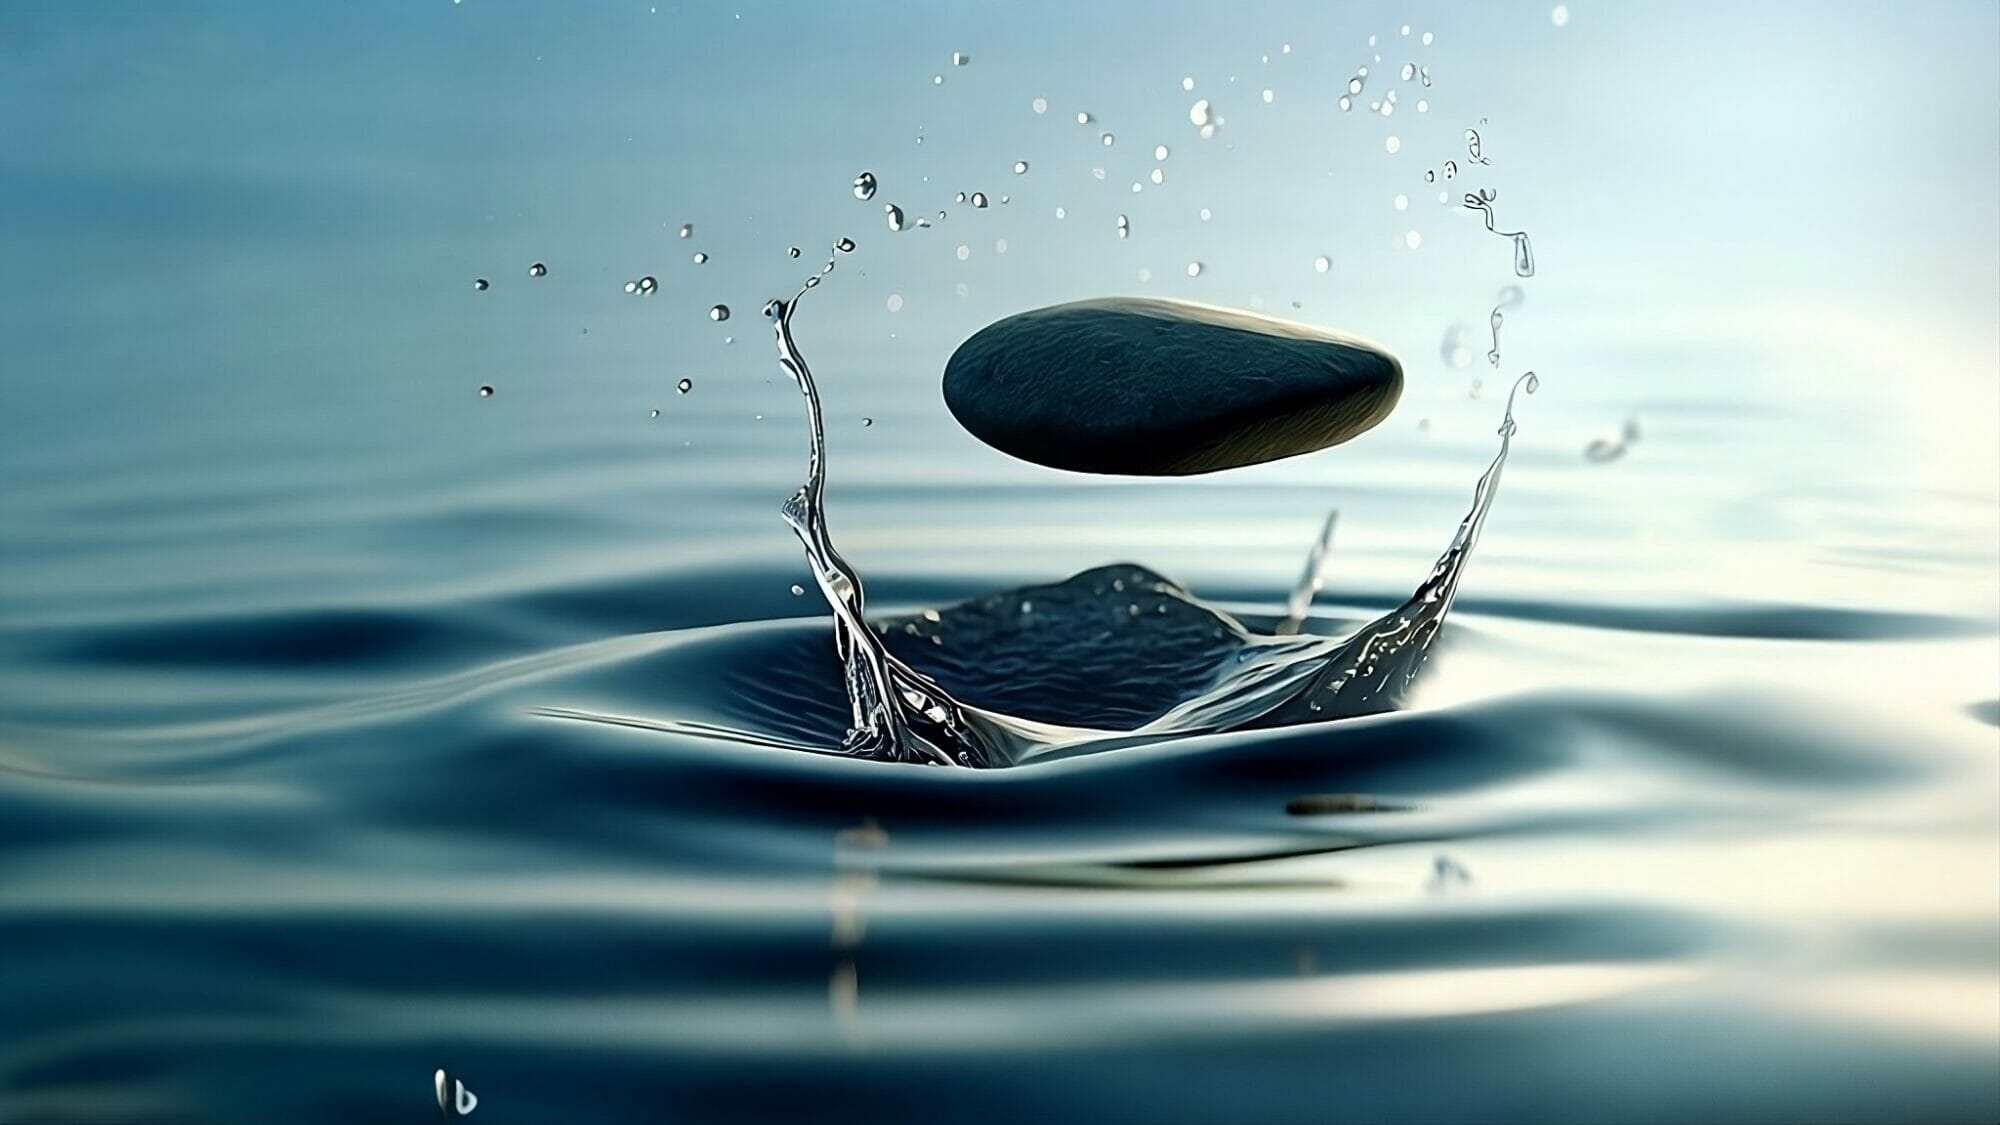 Matts Monthly Skimmer. An image of a stone skipping over water leaving ripples and splashes behind